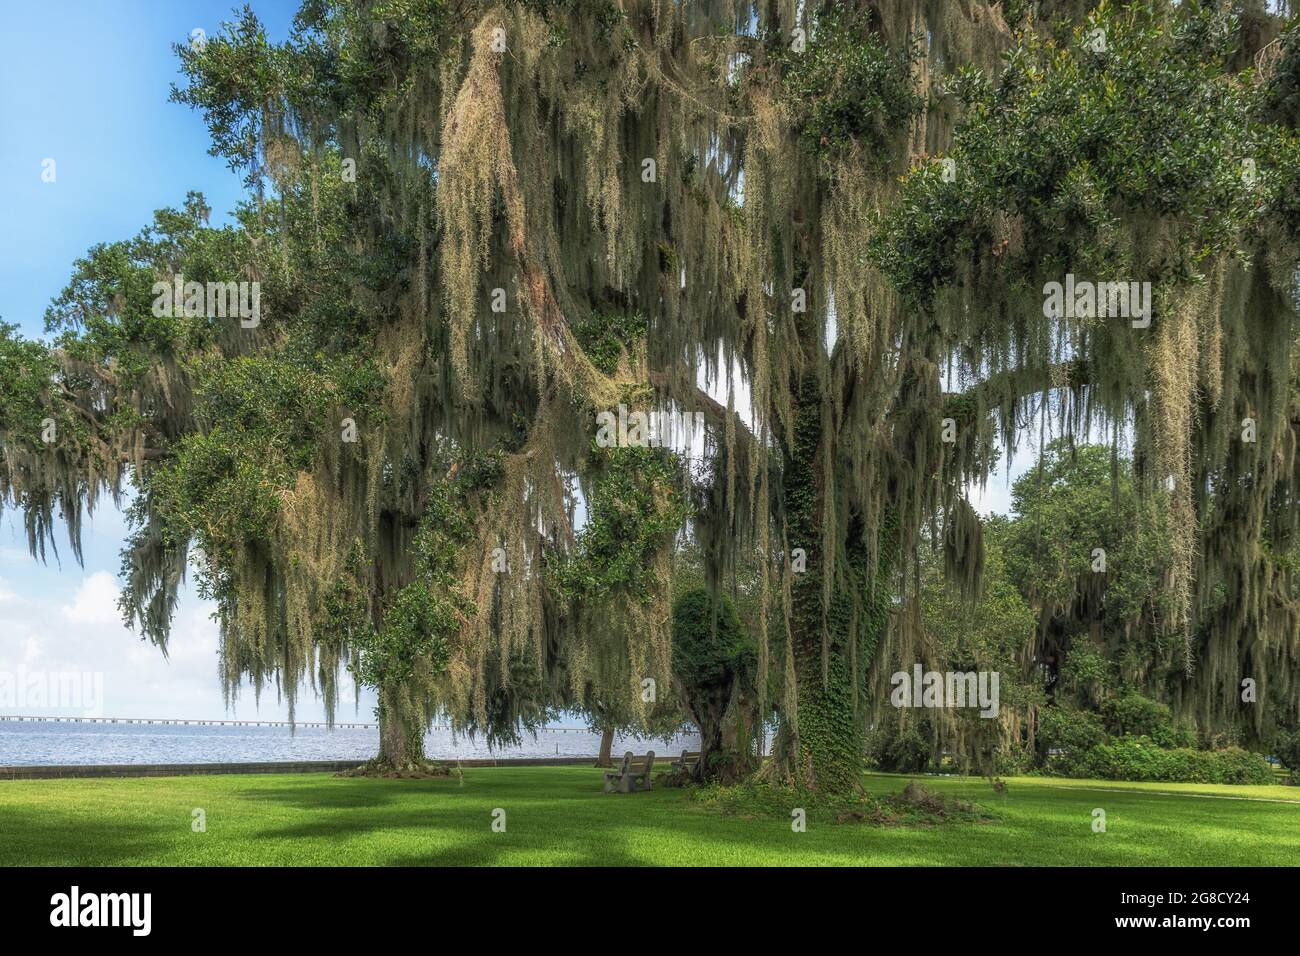 Lake Pontchartrain northshore, north shore lakefront park with Southern Live Oak trees and Spanish Moss, Mandeville, Louisiana, USA. Stock Photo